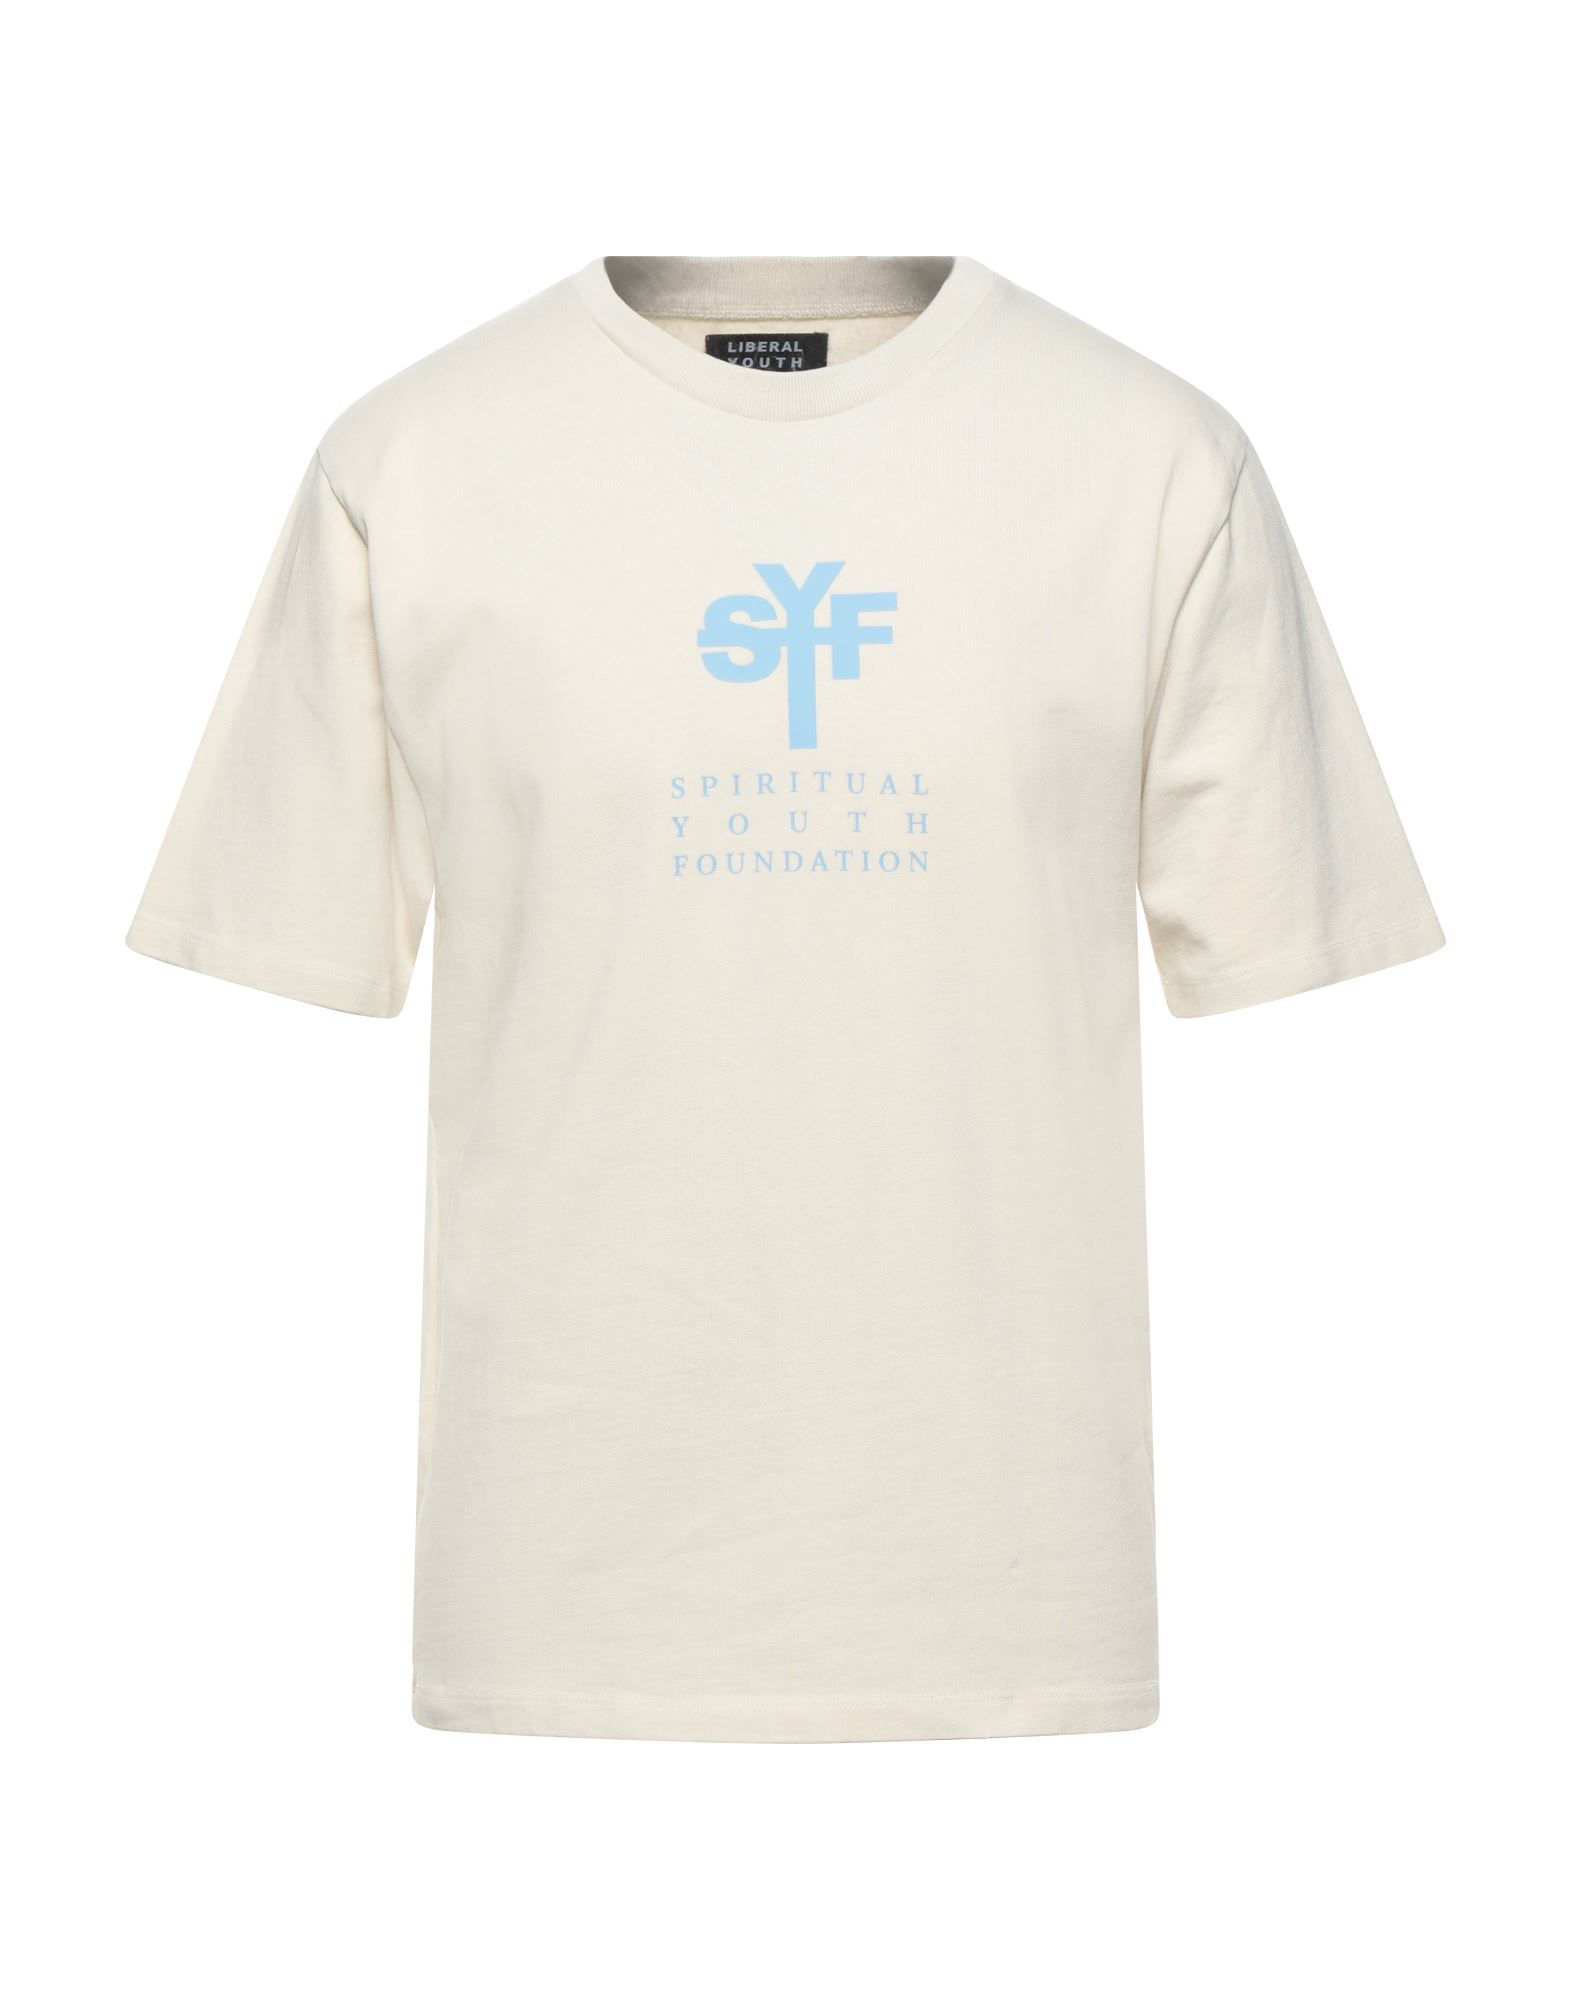 Liberal Youth Ministry T-shirts In Beige